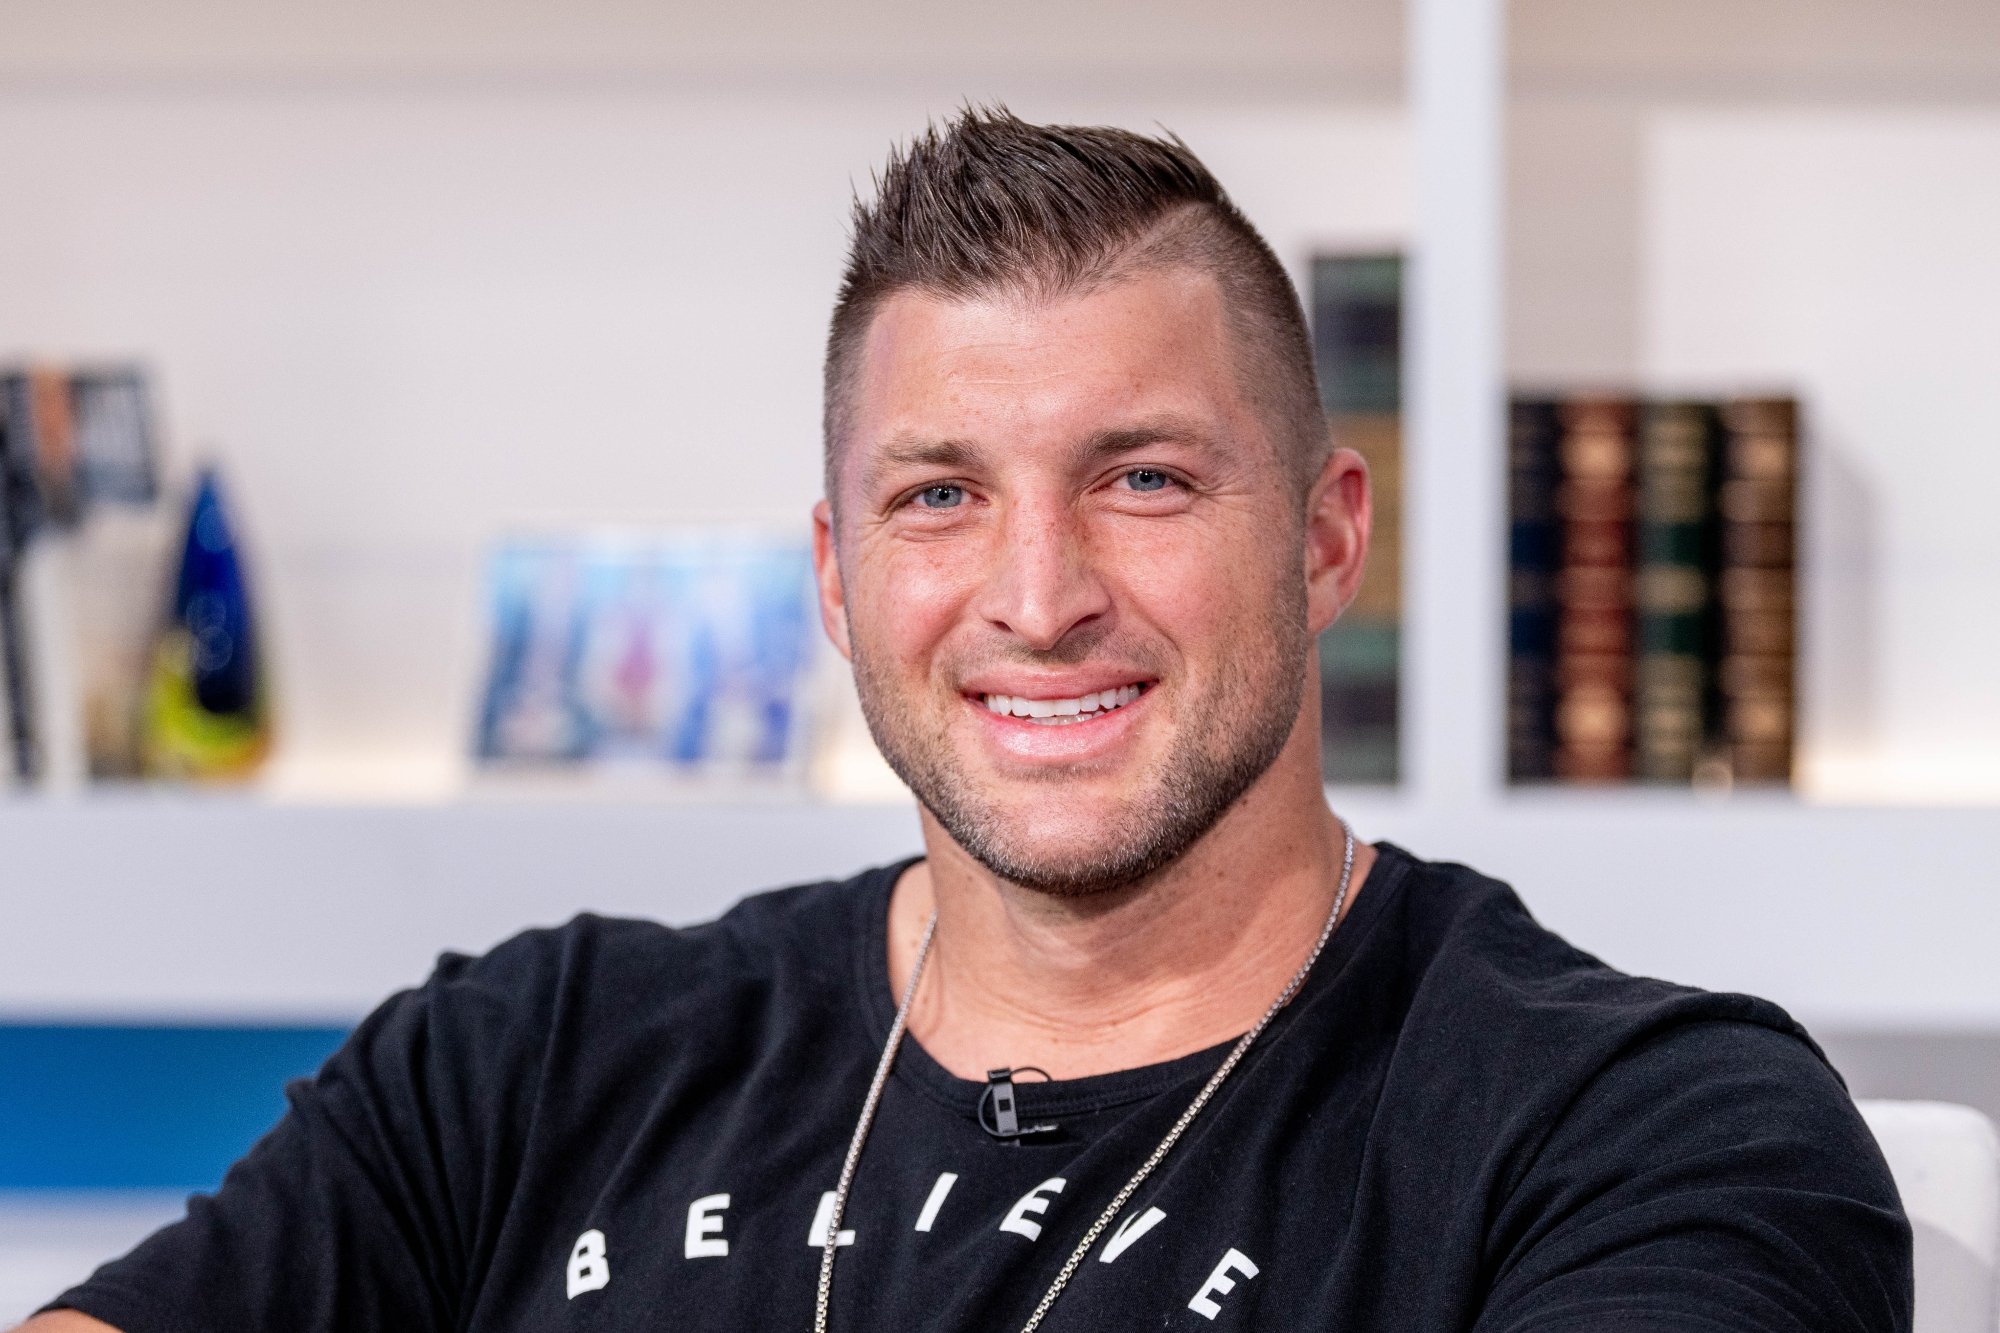 Tim Tebow, who 'Saturday Night Live' made a sketch about. He's smiling and wearing a black t-shirt and a necklace in front of a bookshelf.